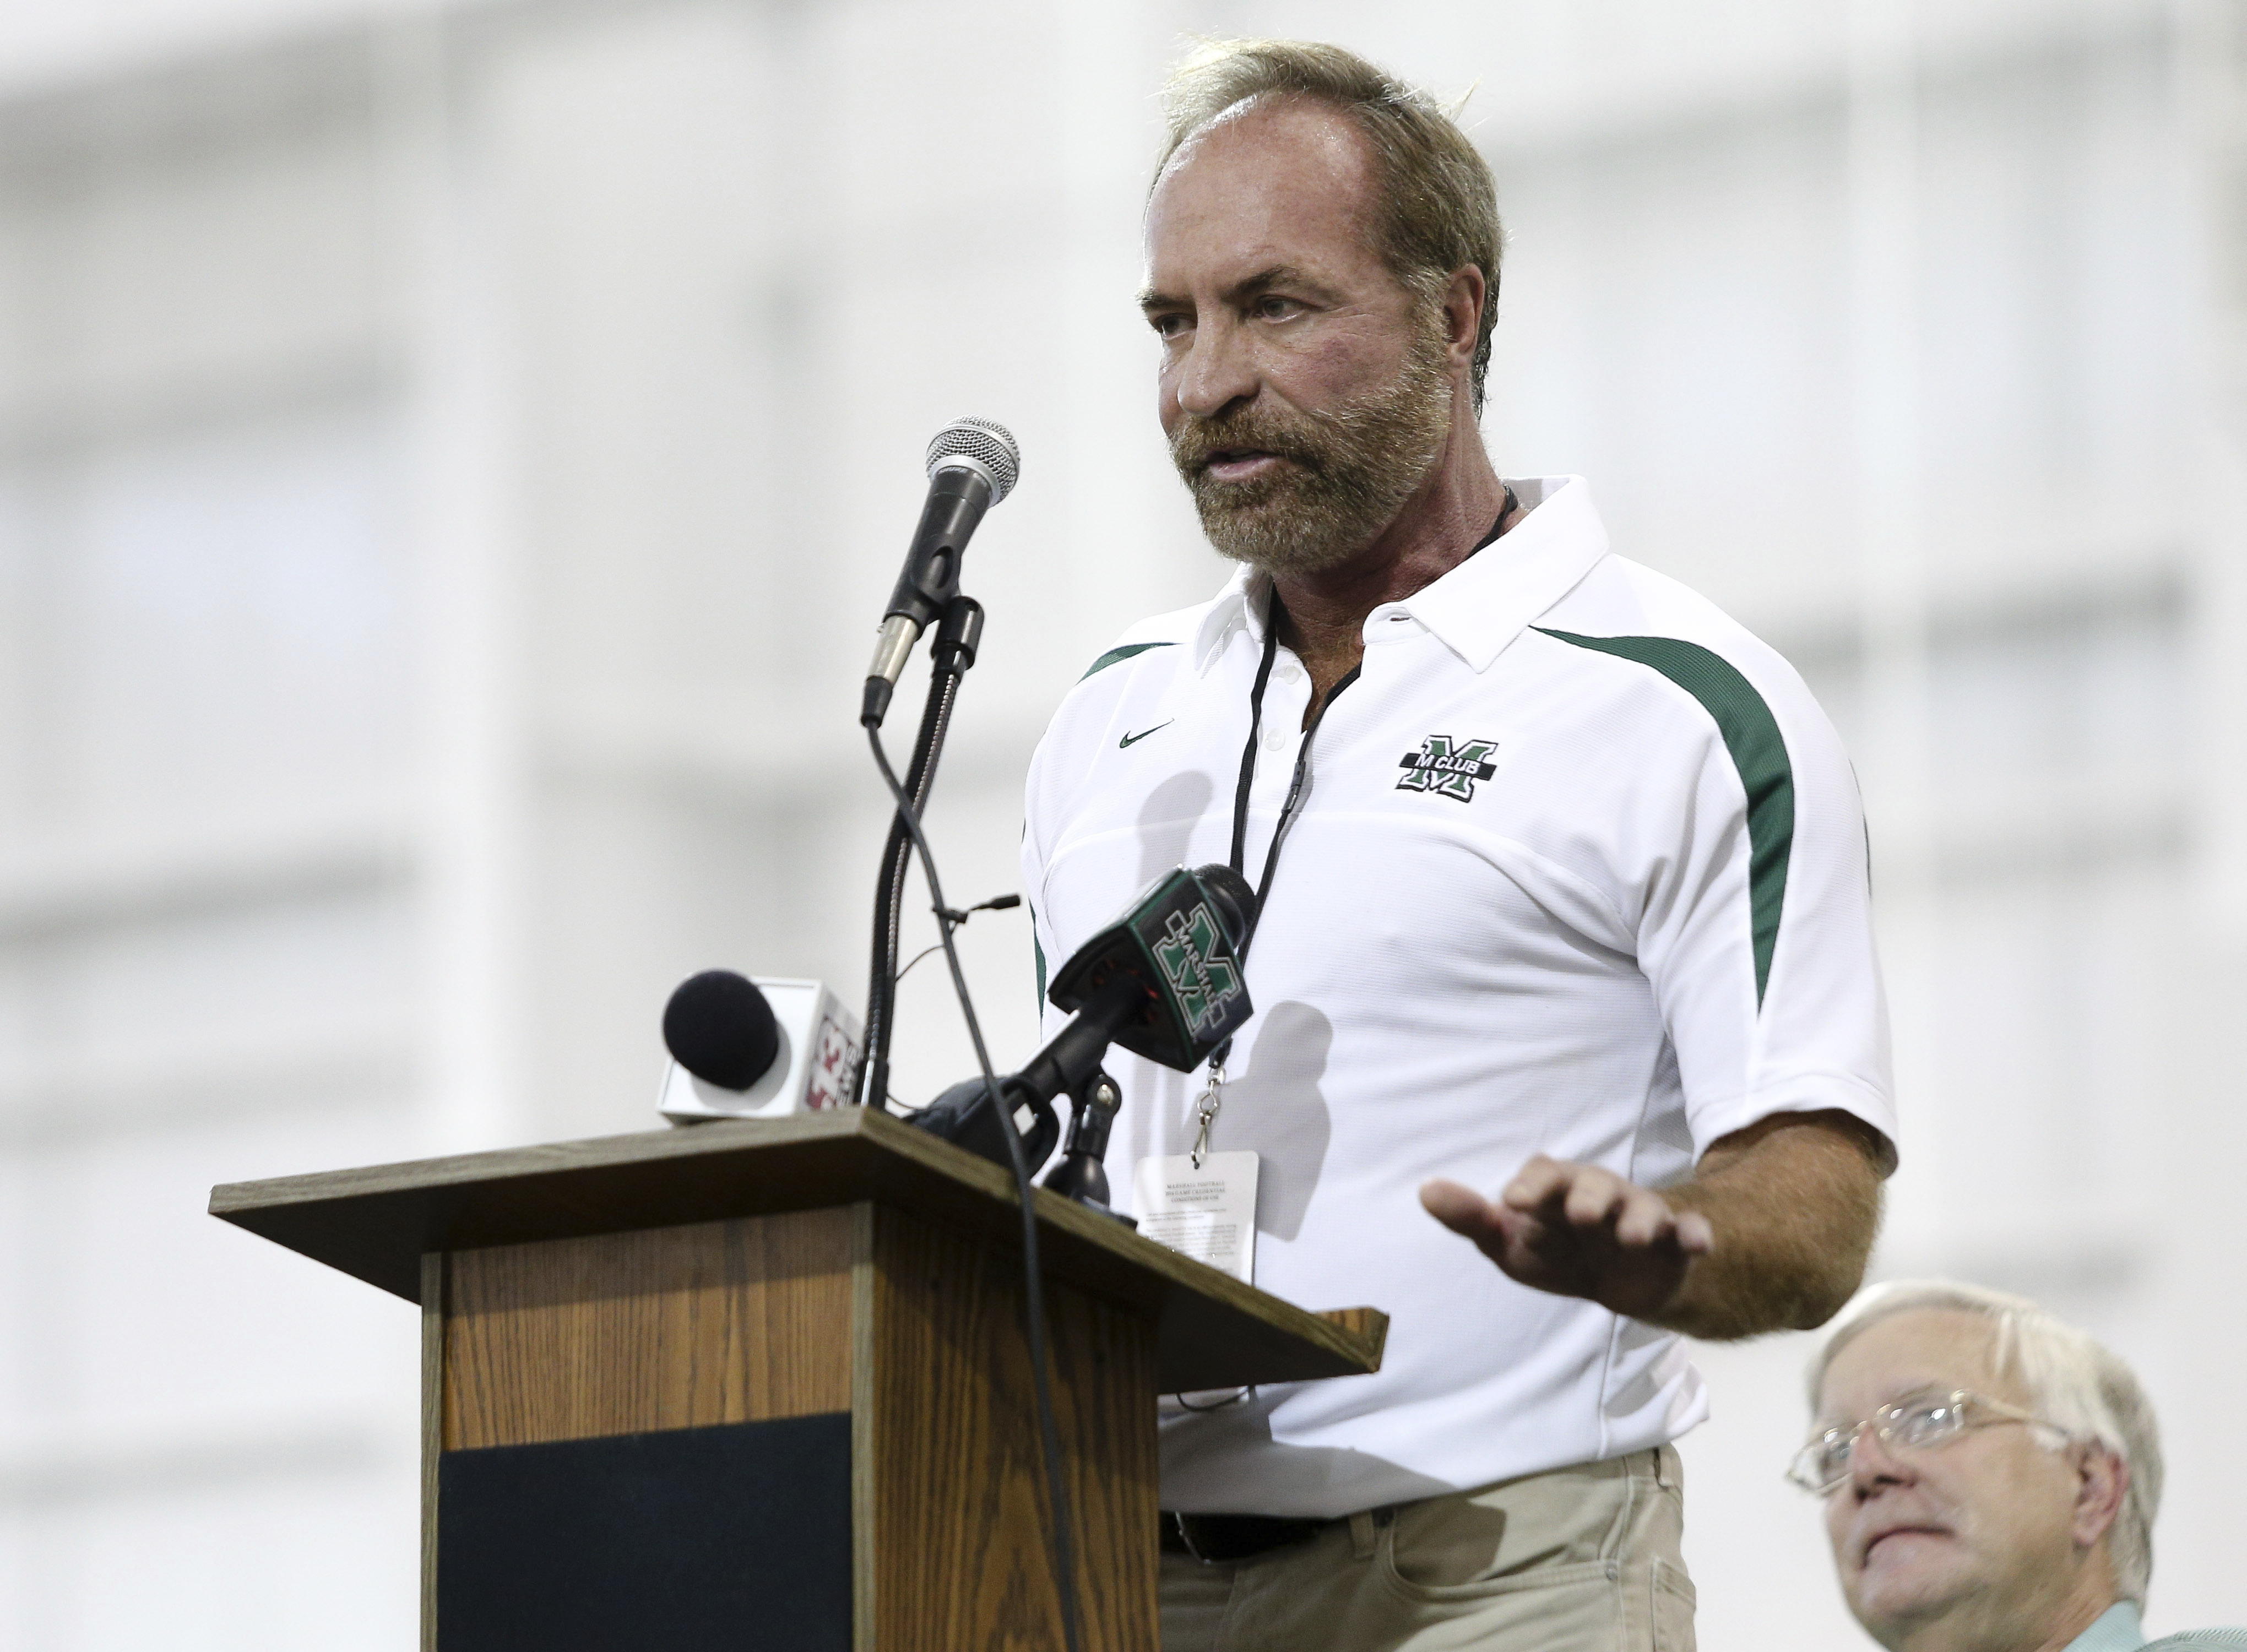 In this Sept. 6, 2014 photo, Chris Cline speaks as Marshall University dedicates the new indoor practice facility as the Chris Cline Athletic Complex in Huntington, W.Va. Police in the Bahamas say a helicopter flying from Big Grand Cay island to Fort Lauderdale has crashed, killing seven Americans on board.  None of the bodies recovered from the downed helicopter have been identified, but police Supt. Shanta Knowles told The Associated Press on Friday, July 5, 2019,  that the missing-aircraft report from Florida said billionaire Chris Cline was on board. (Sholten Singer/The Herald-Dispatch via AP) (Sholten Singer&mdash;AP)